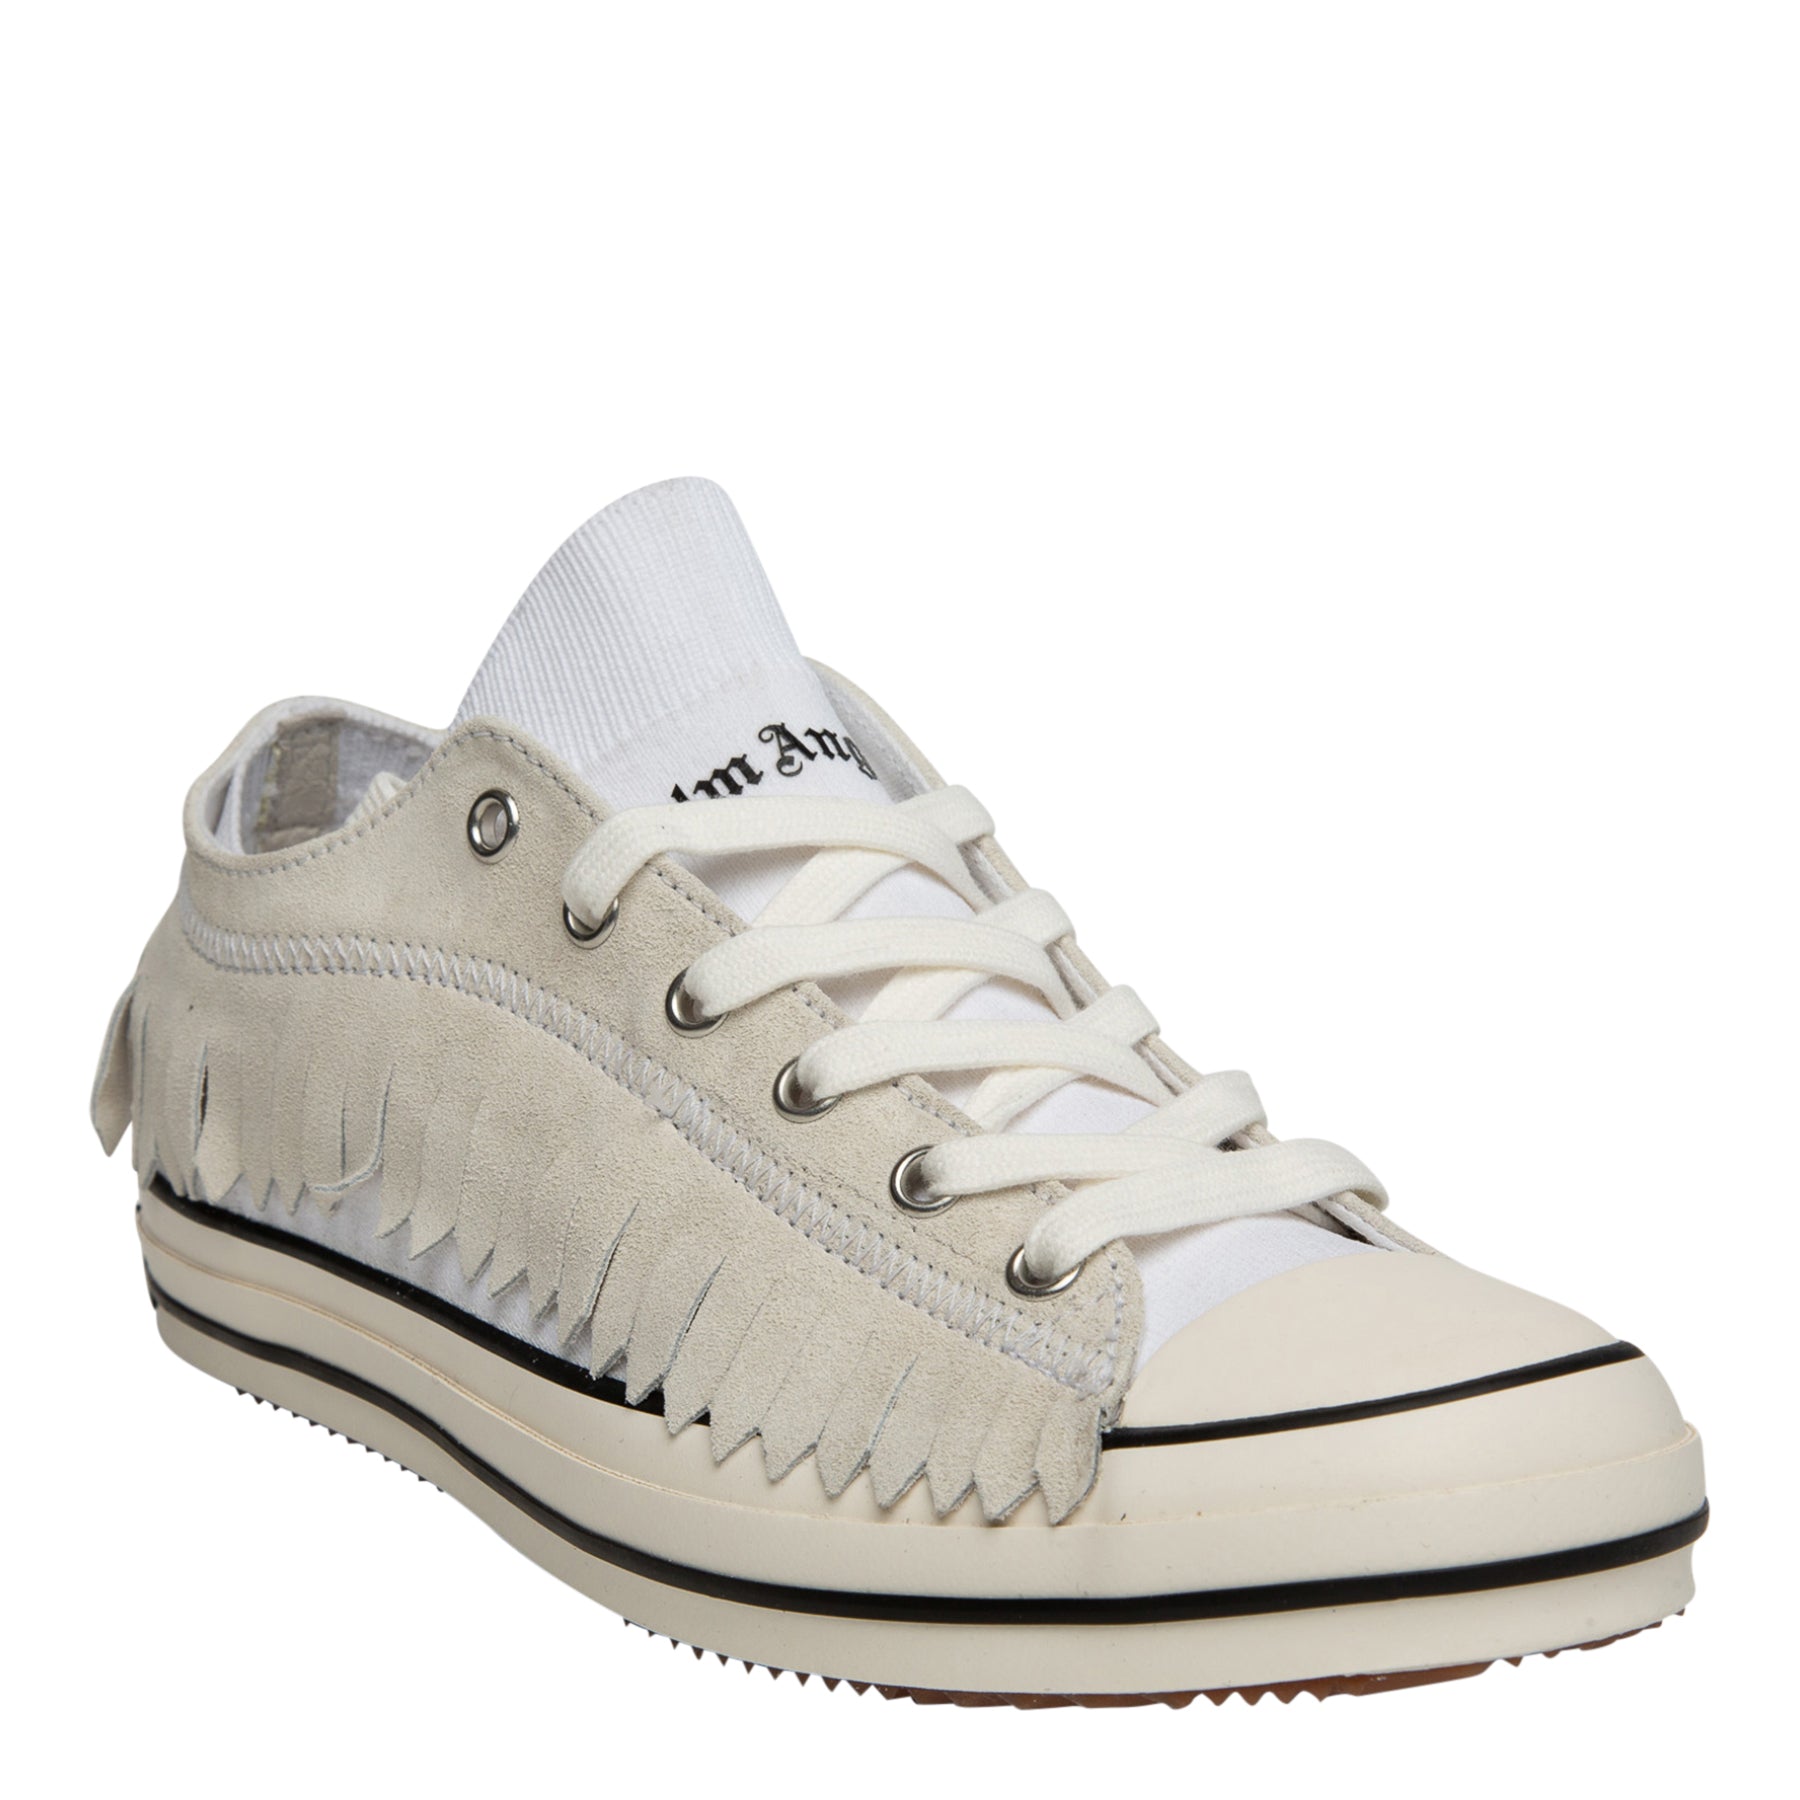 PALM ANGELS | FRINGE LOW-TOP SNEAKERS